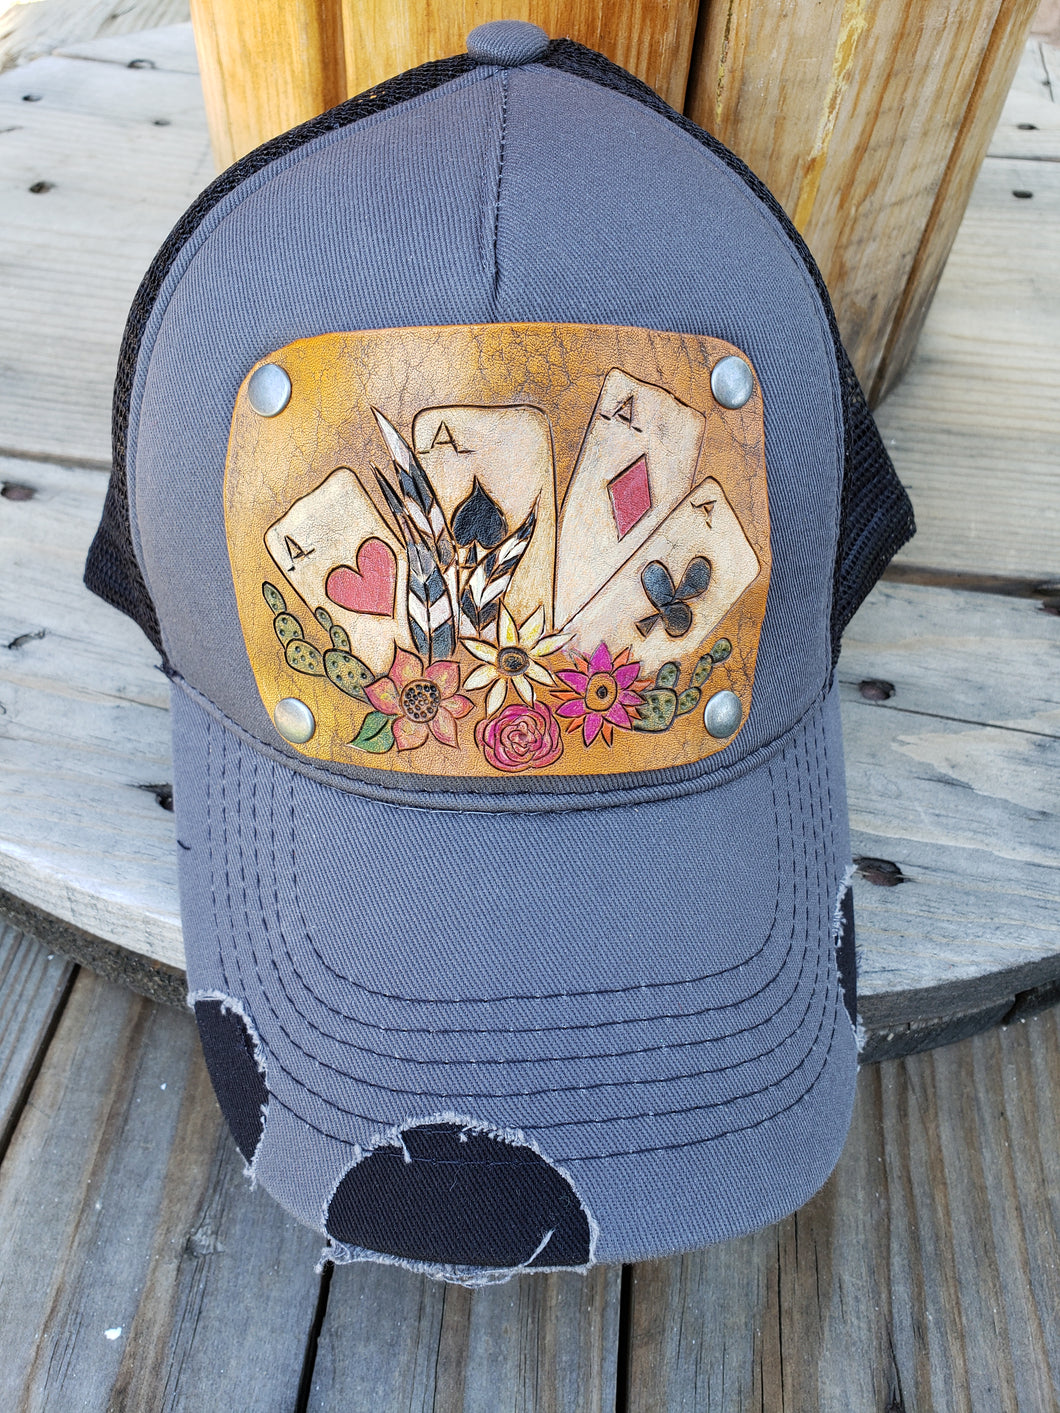 Aces tooled leather hat